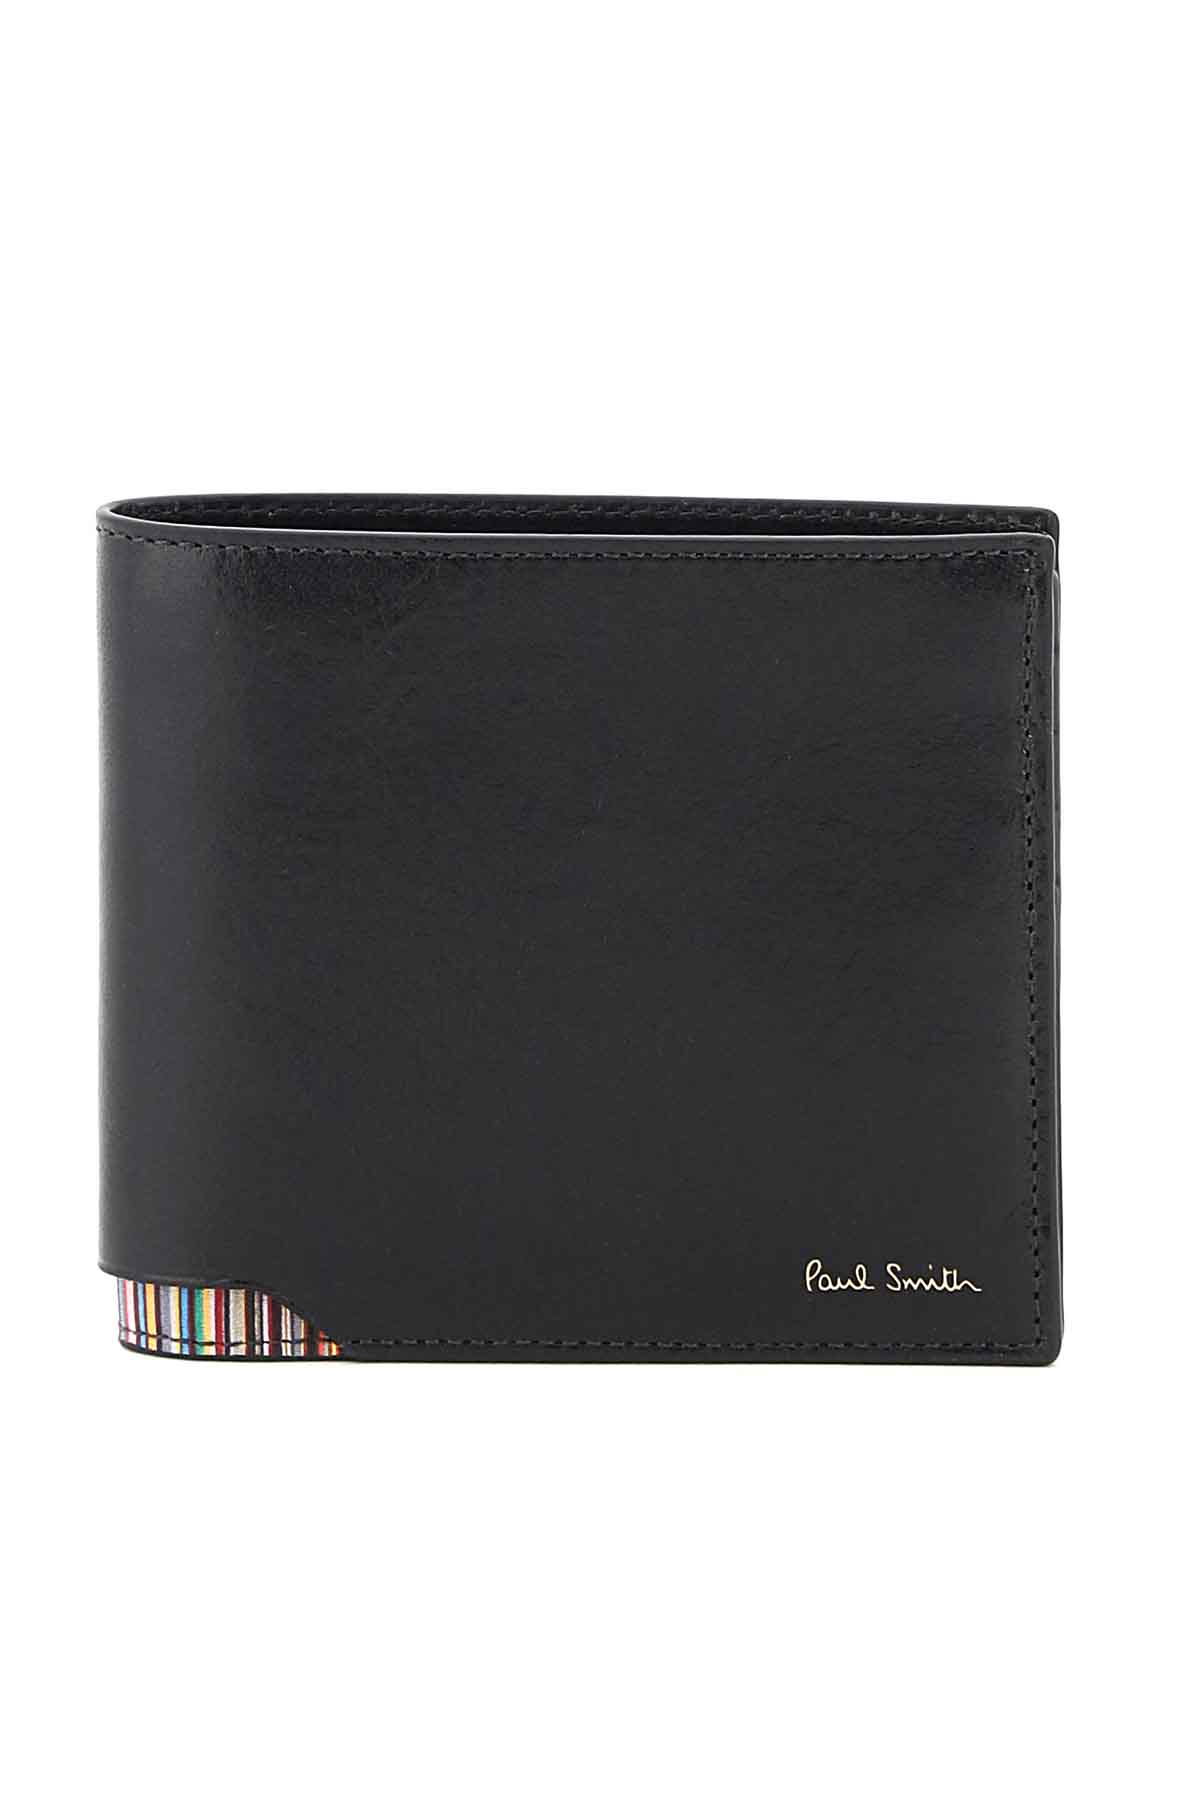 Paul Smith Wallet With Signature Stripe Insert